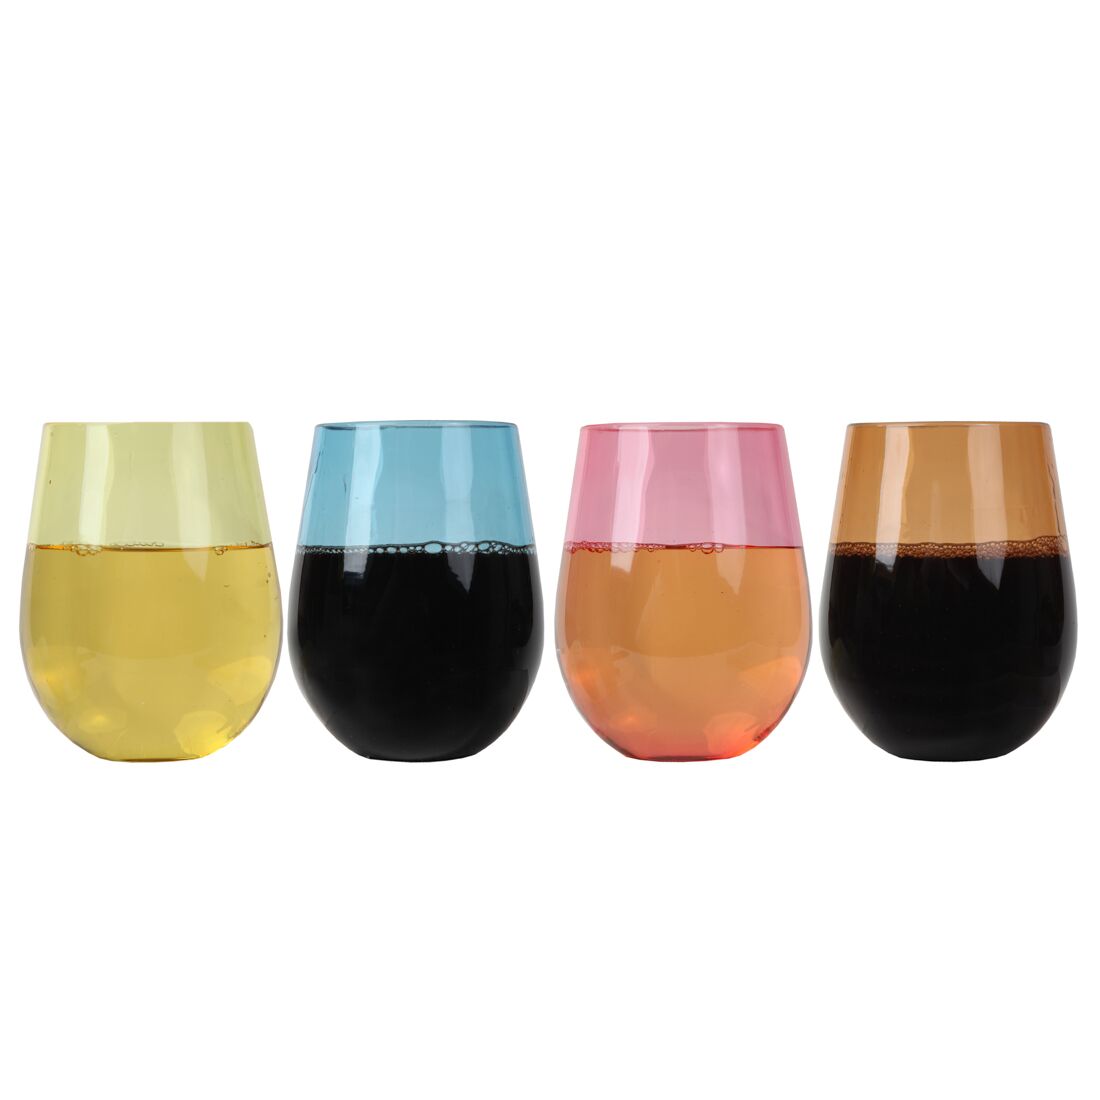 Lily's Home Unbreakable Acrylic Wine Glasses, Made of